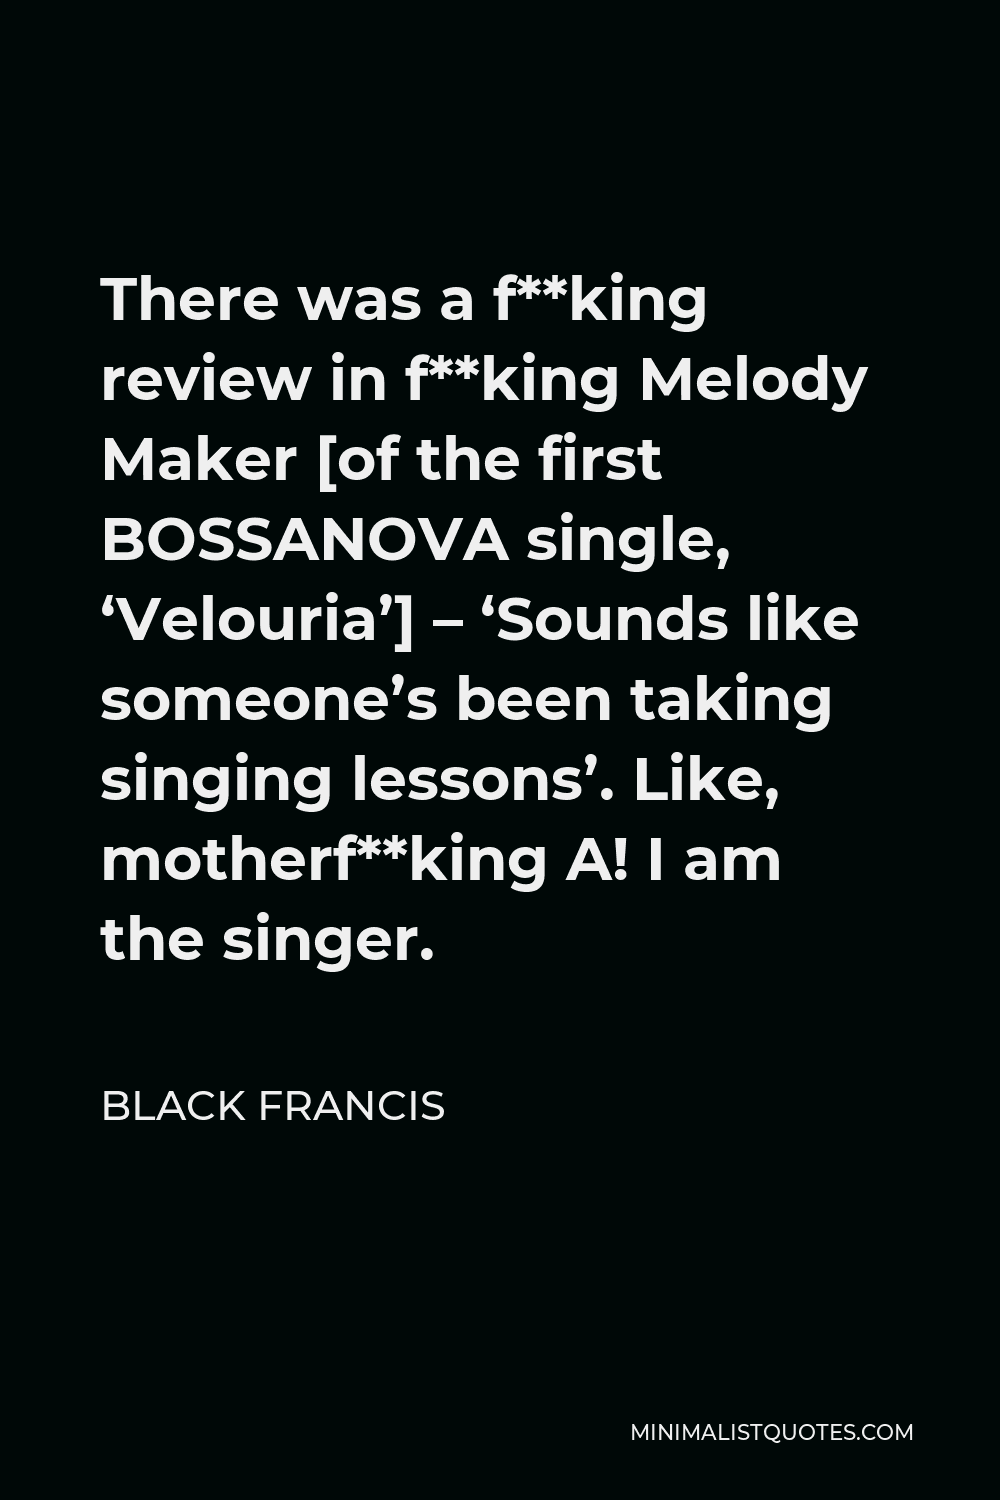 Black Francis Quote - There was a f**king review in f**king Melody Maker [of the first BOSSANOVA single, ‘Velouria’] – ‘Sounds like someone’s been taking singing lessons’. Like, motherf**king A! I am the singer.